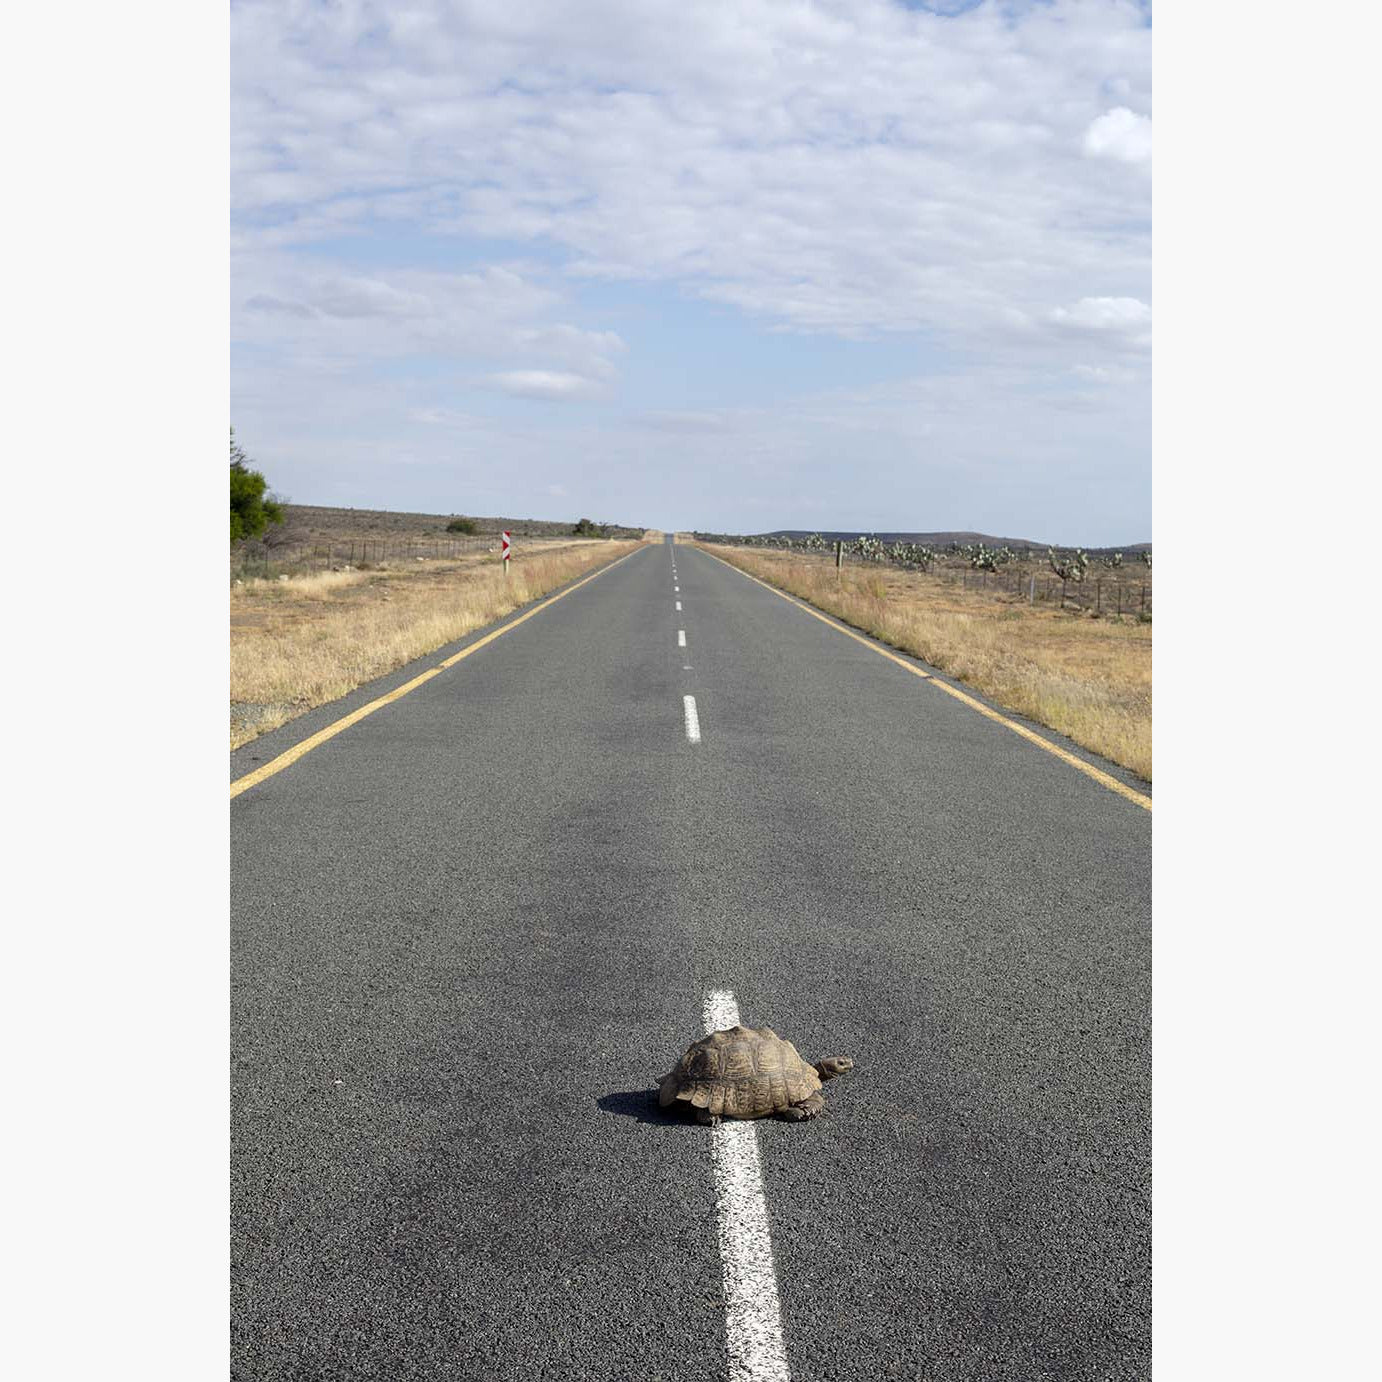 Tortoise in the road